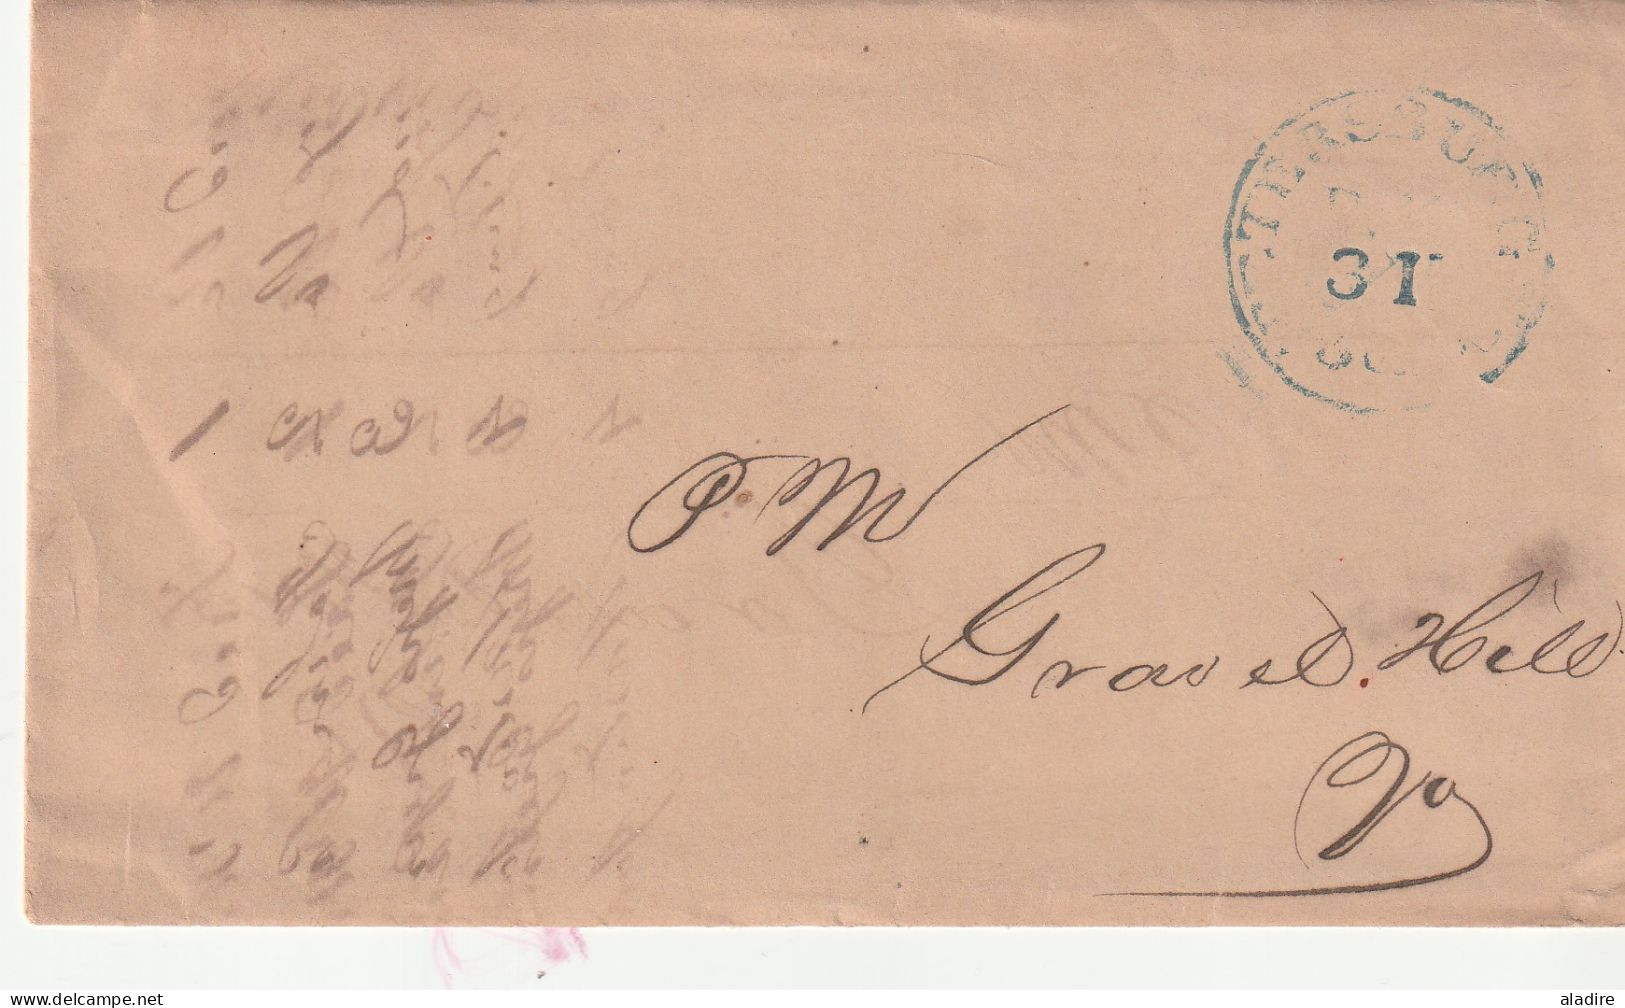 USA - 14 miscellaneous US NAVY , PAQUEBOT and other letters, covers and cards ... 6 euros